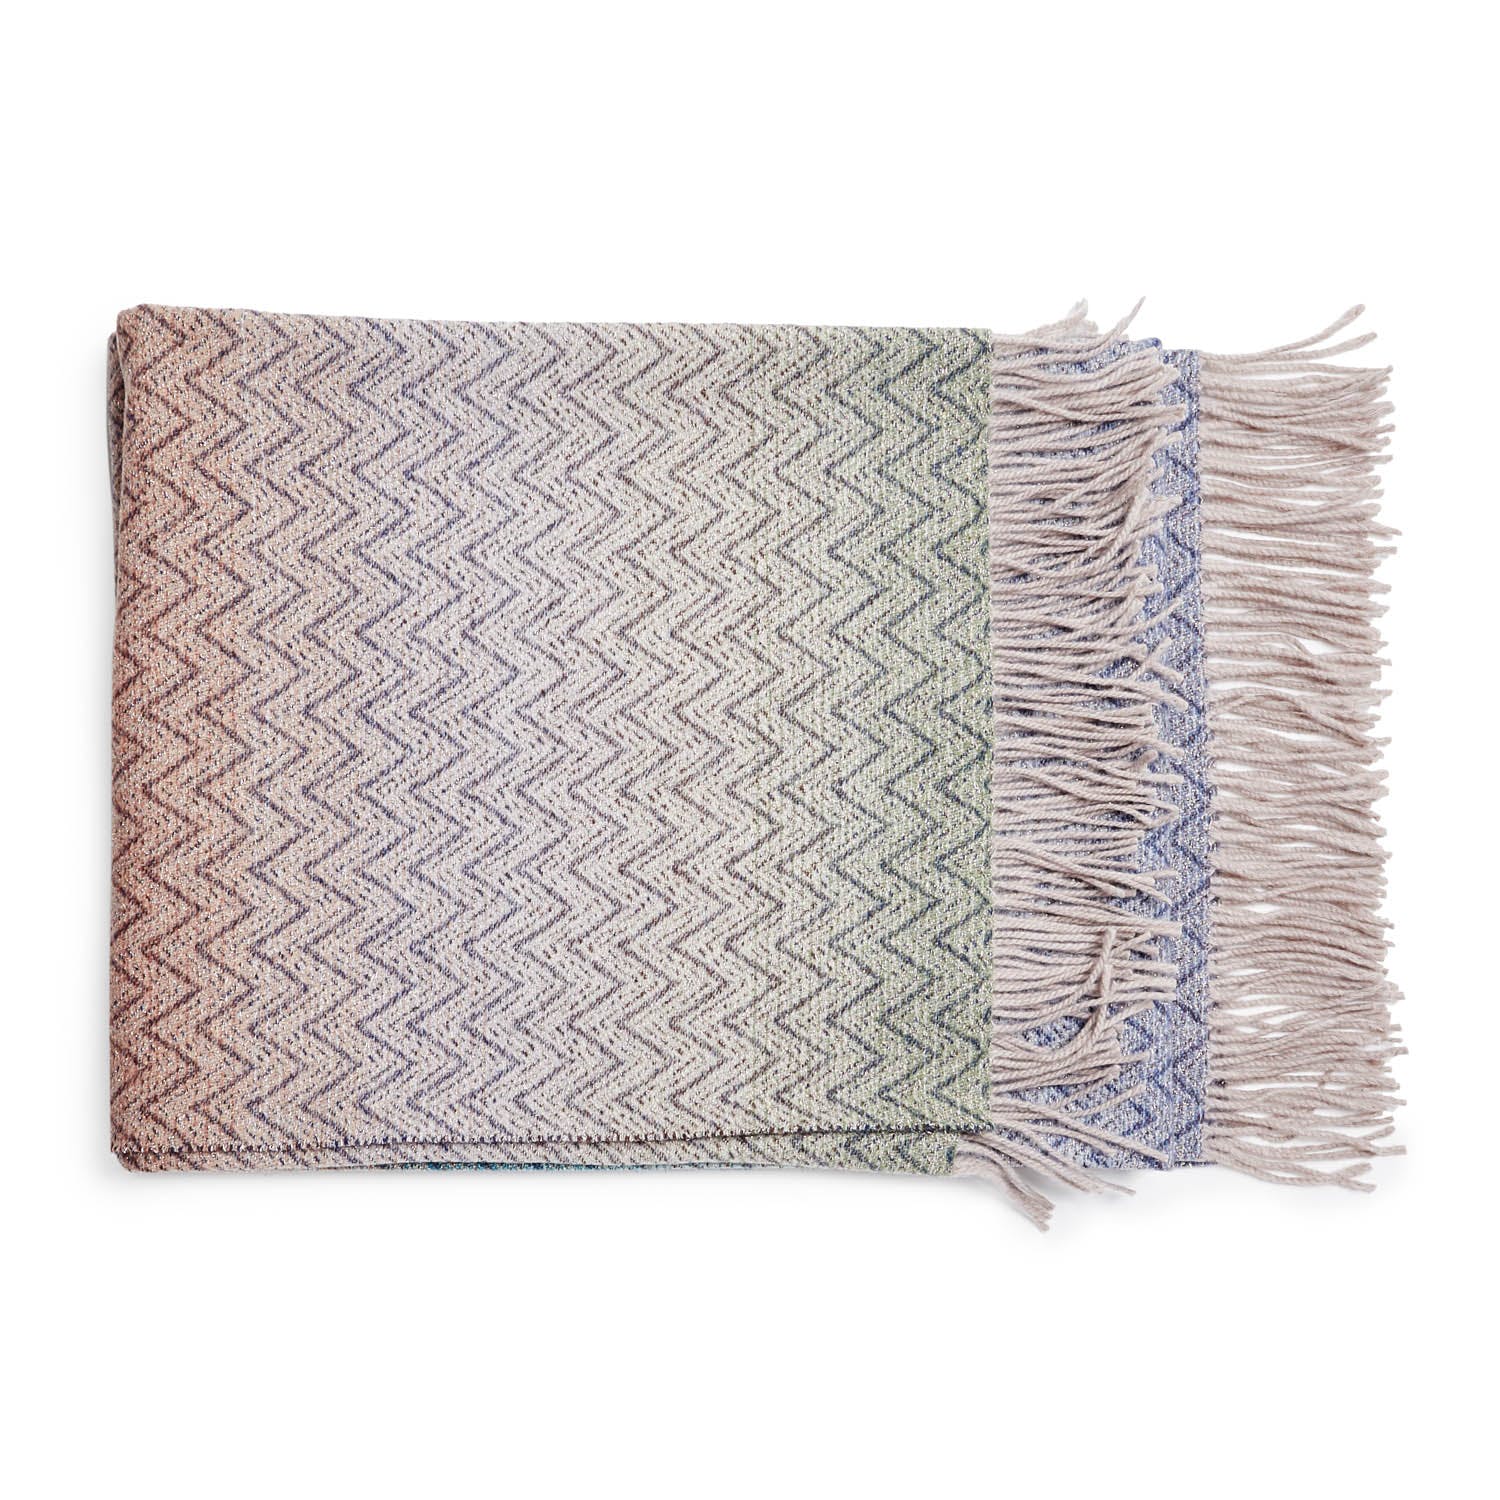 Neatly folded herringbone throw blanket with gradient colors and fringe.